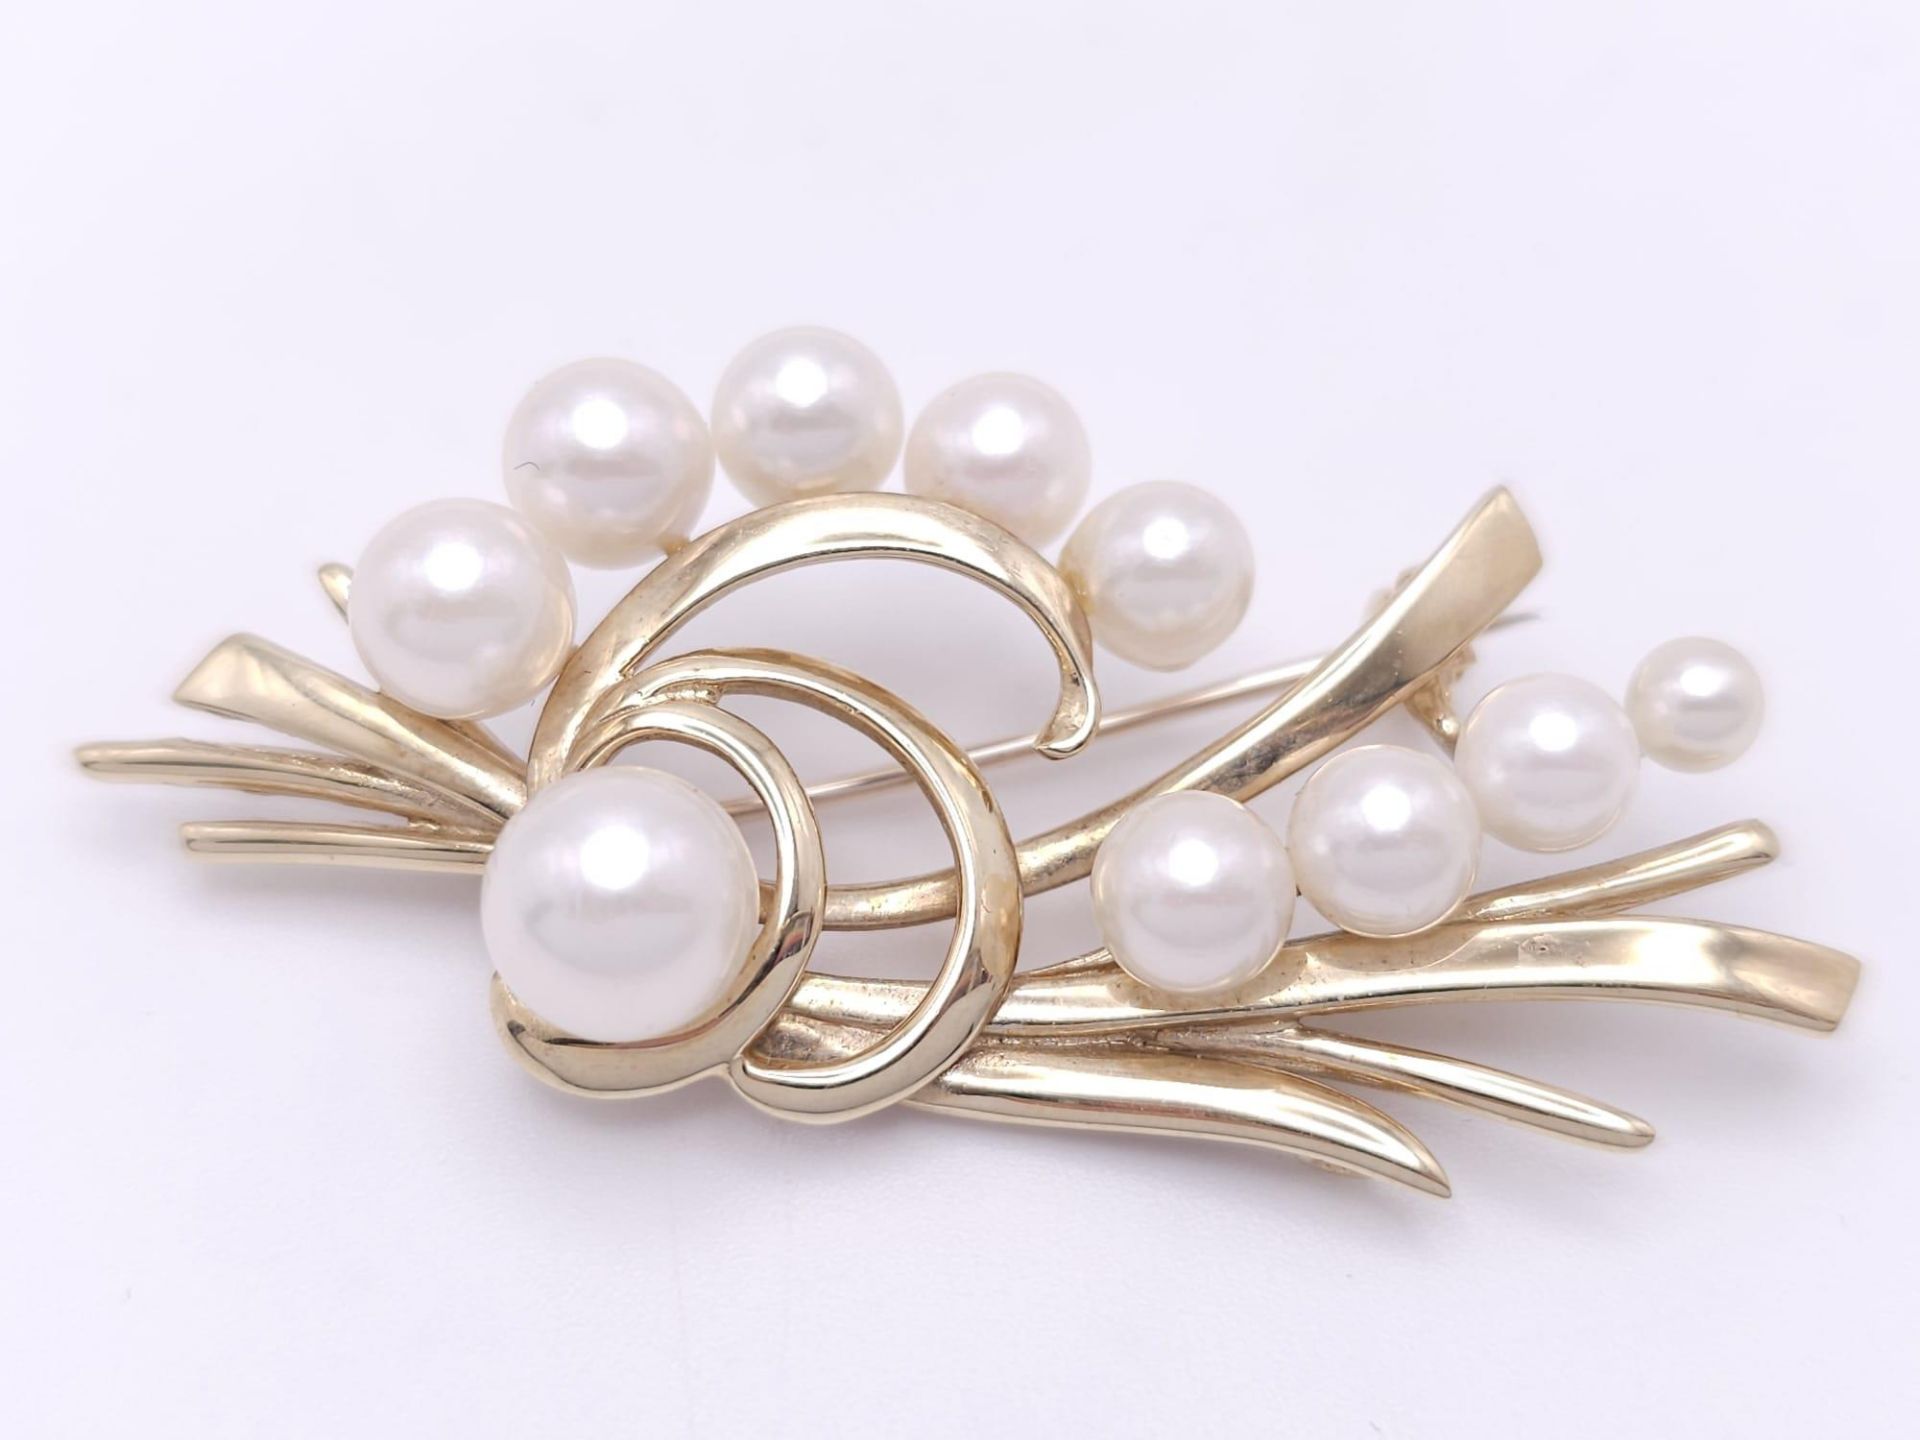 A 9k Yellow Gold and Pearl Decorative Floral Brooch. 5cm. 8g weight - Image 9 of 23